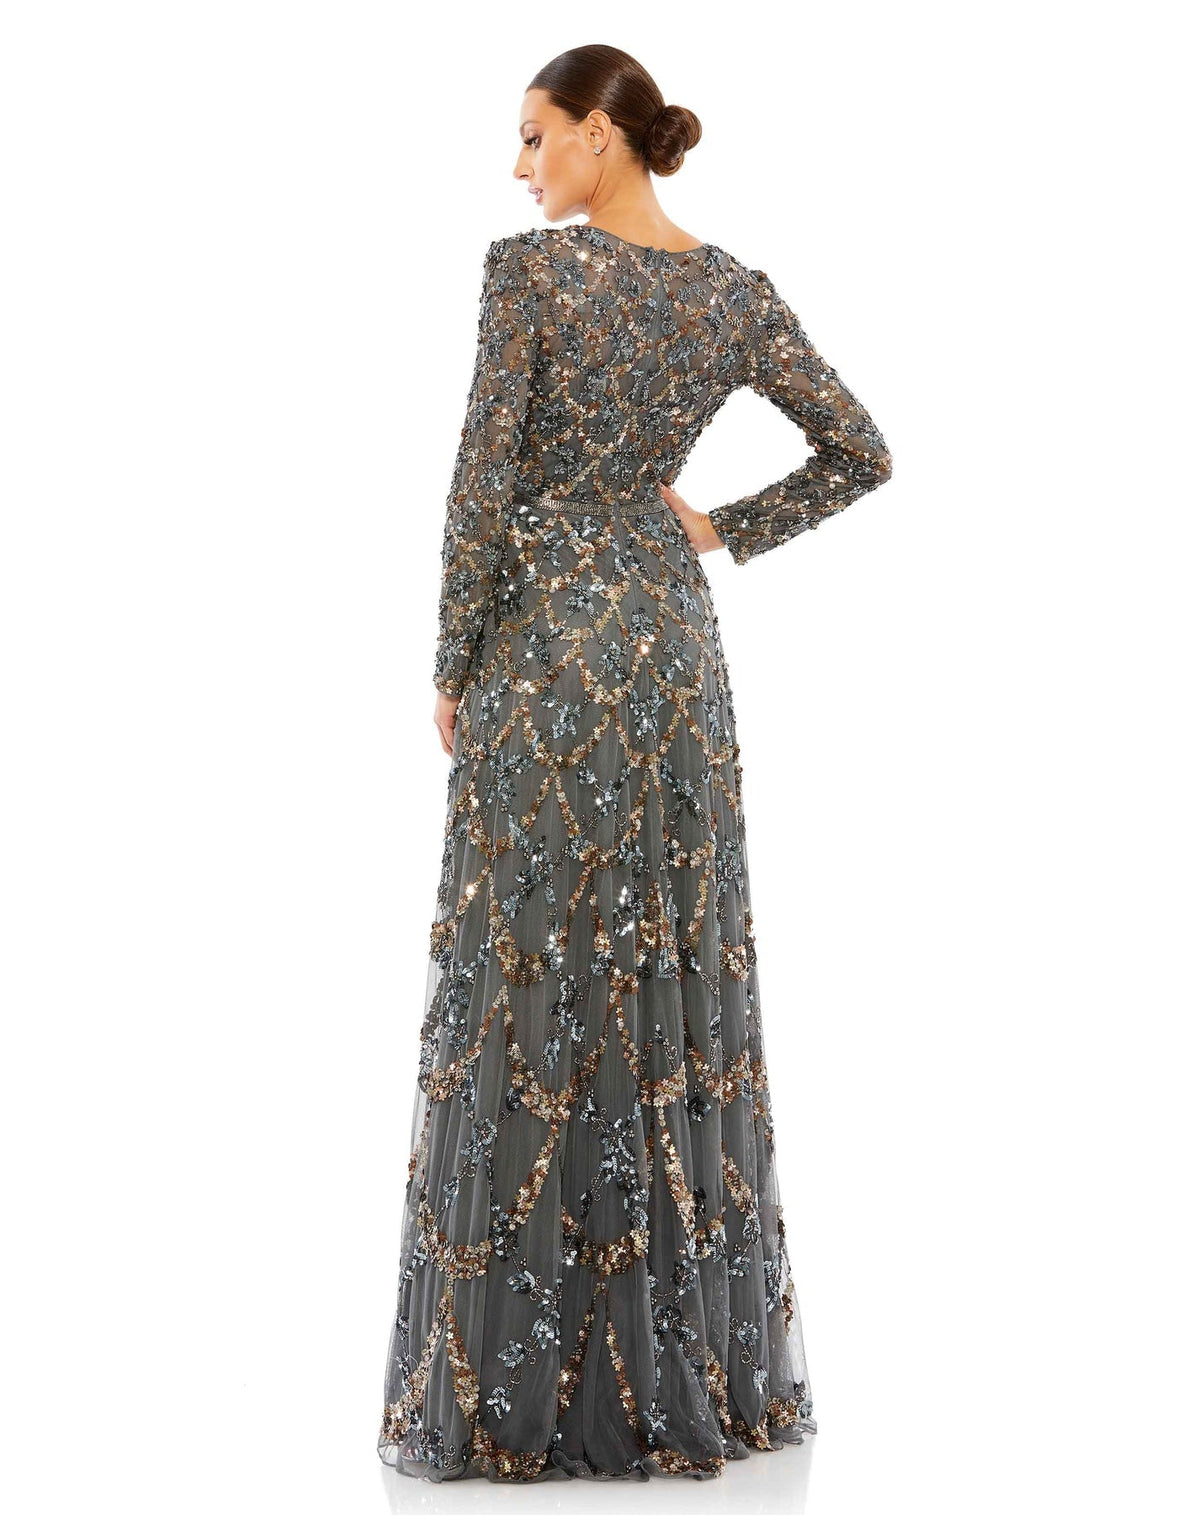 Mac Duggal Style #5496 Embellished illusion high neck long sleeve A-line gown - charcoal grey back